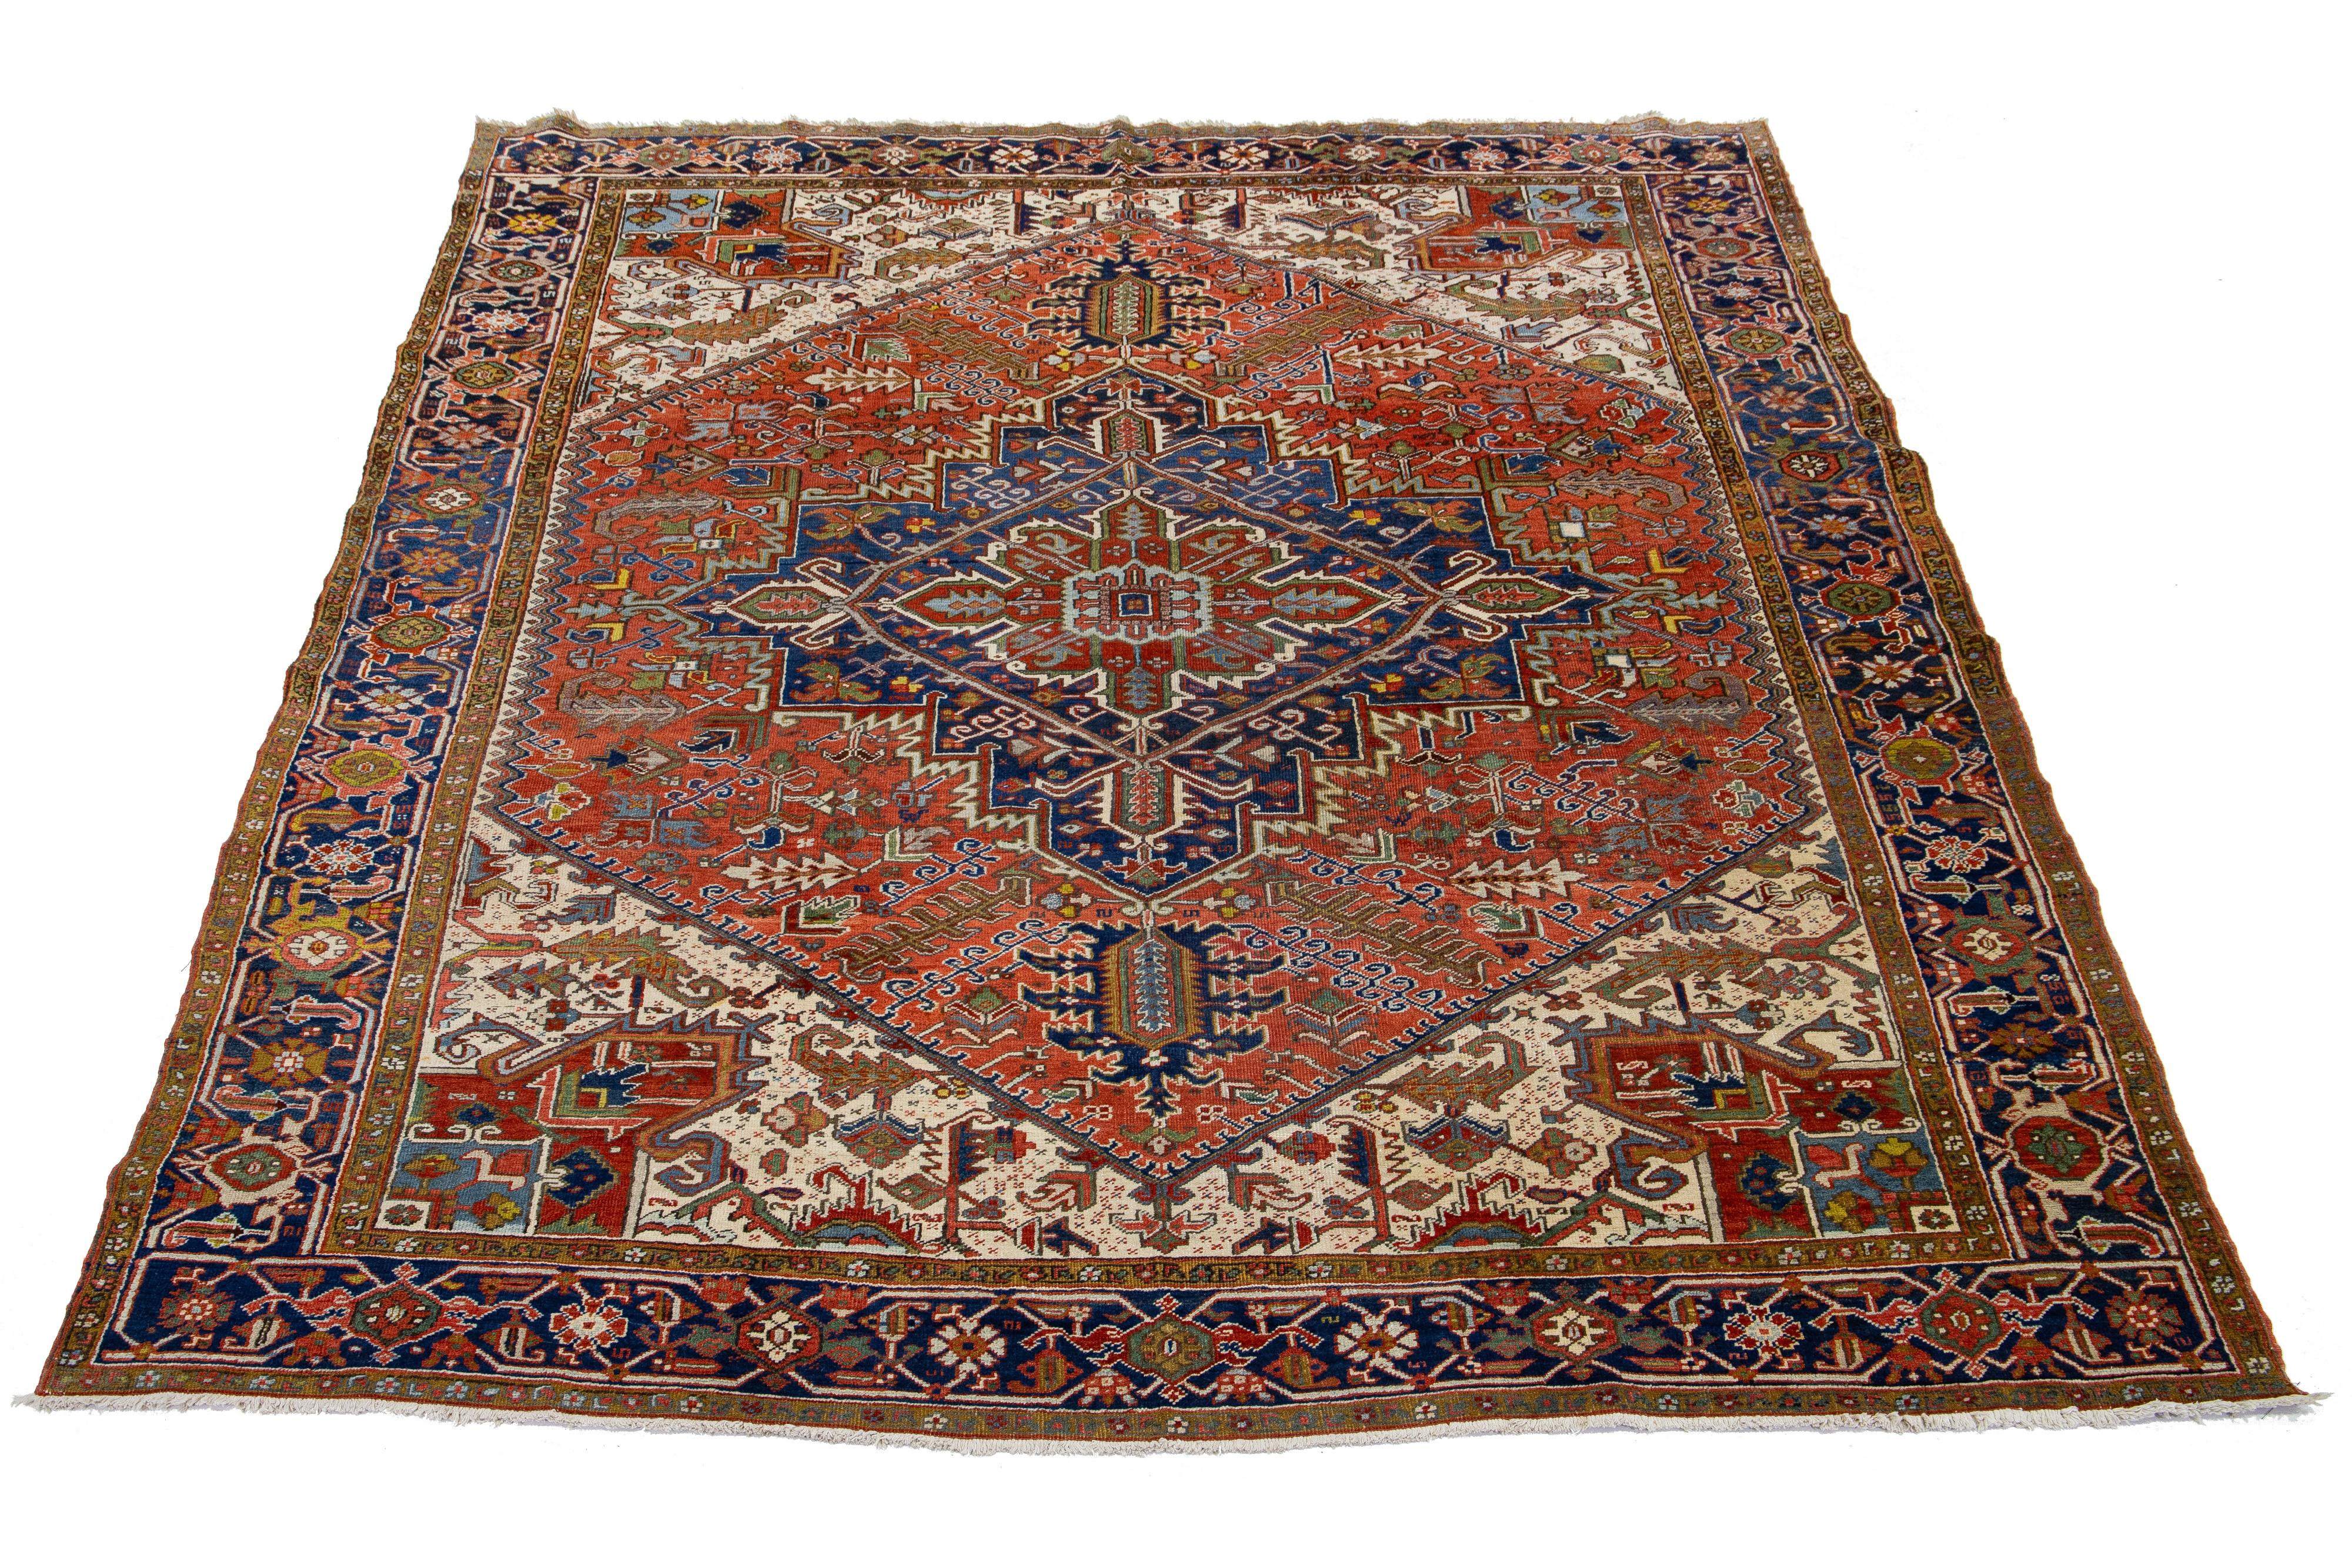 Beautiful vintage Persian Heriz rug with a red-rust field. This rug showcases a medallion design in the center, along with multicolored accents. 

This rug measures 9'5